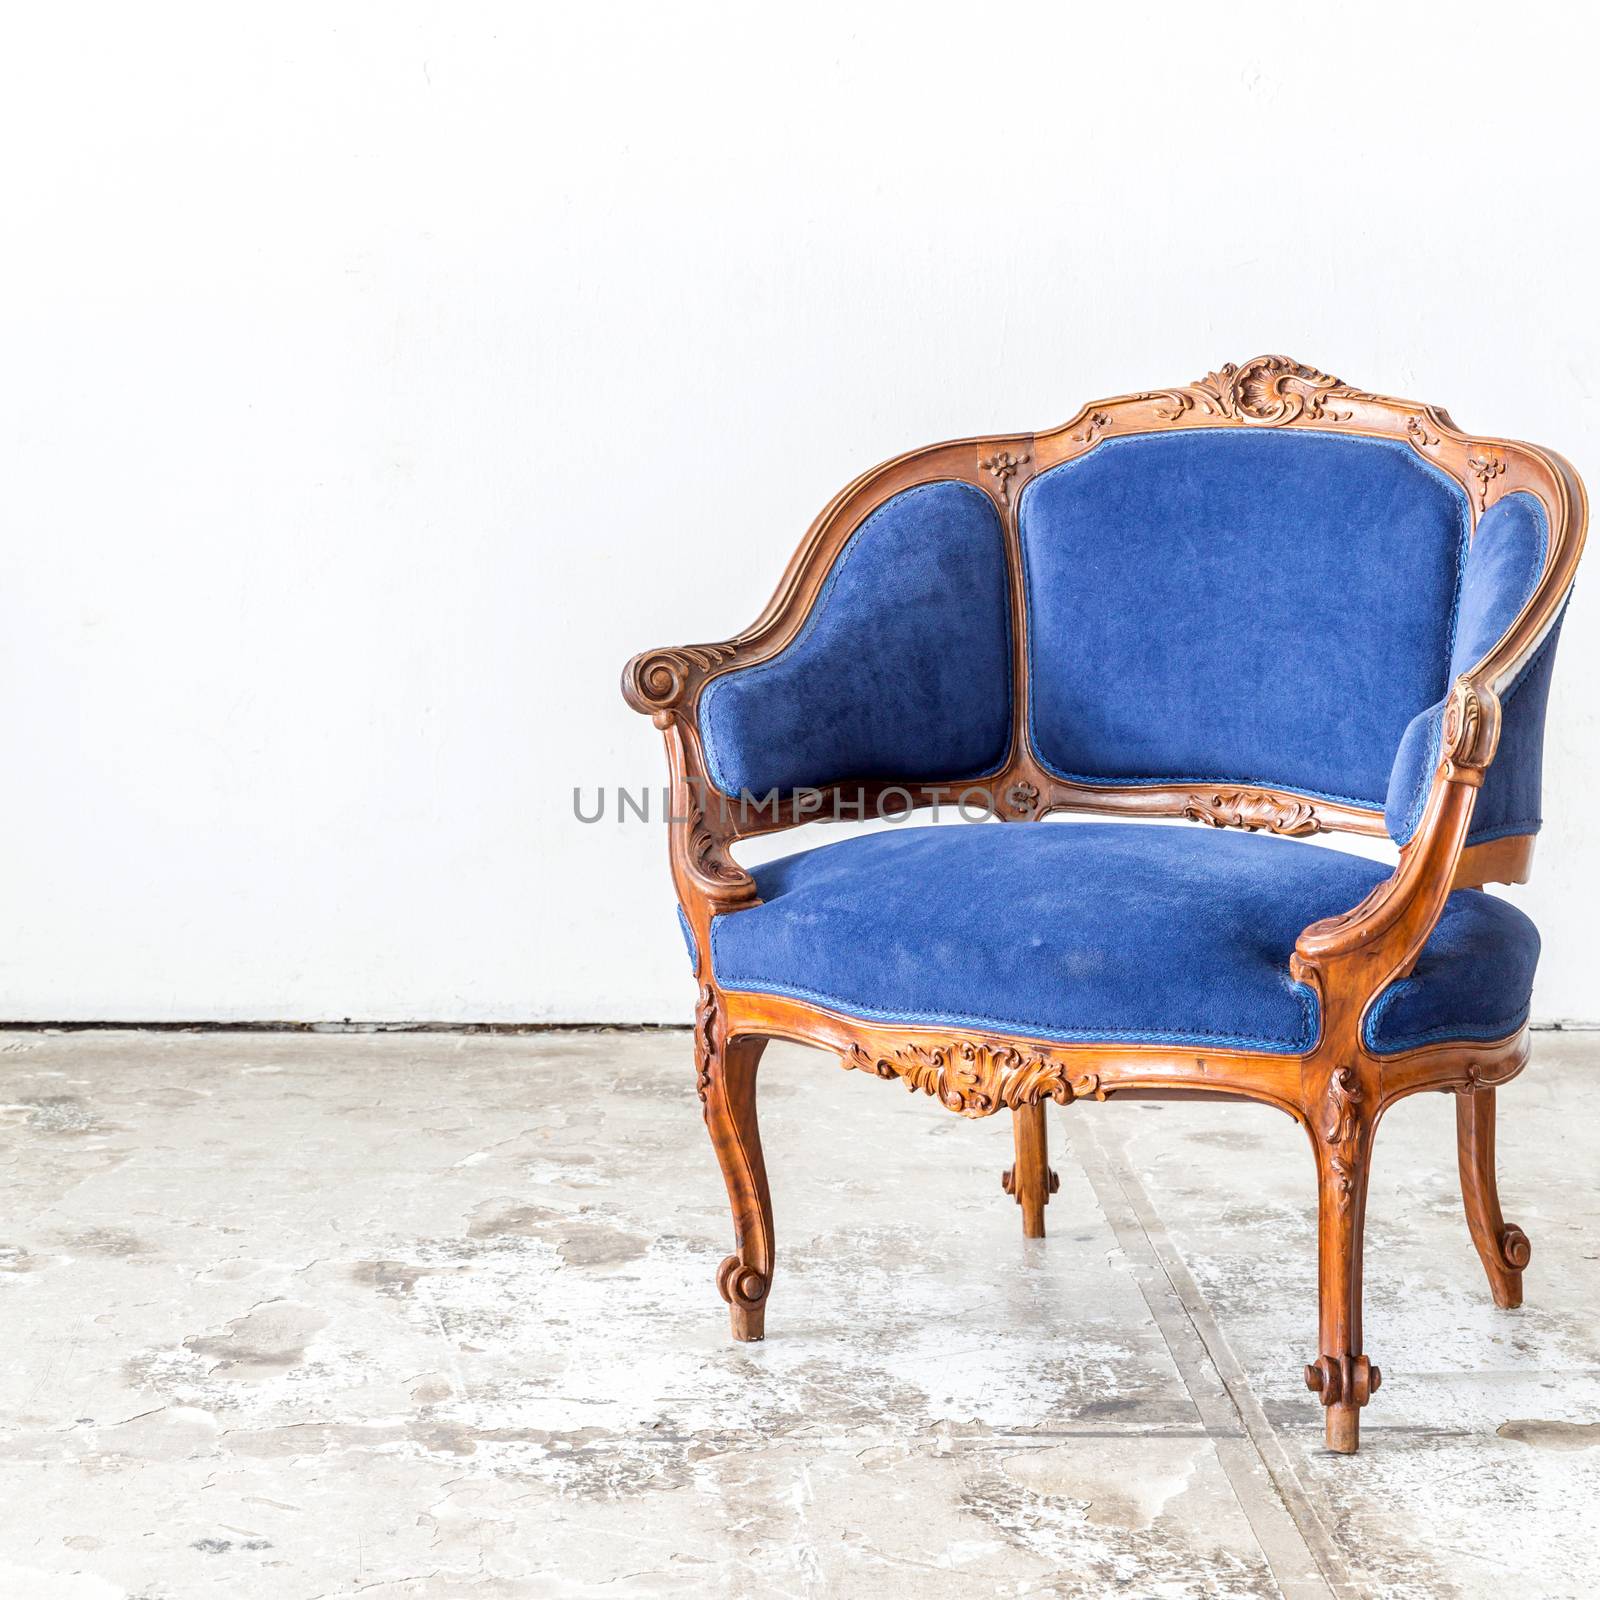 Blue sofa couch in vintage room - classical style